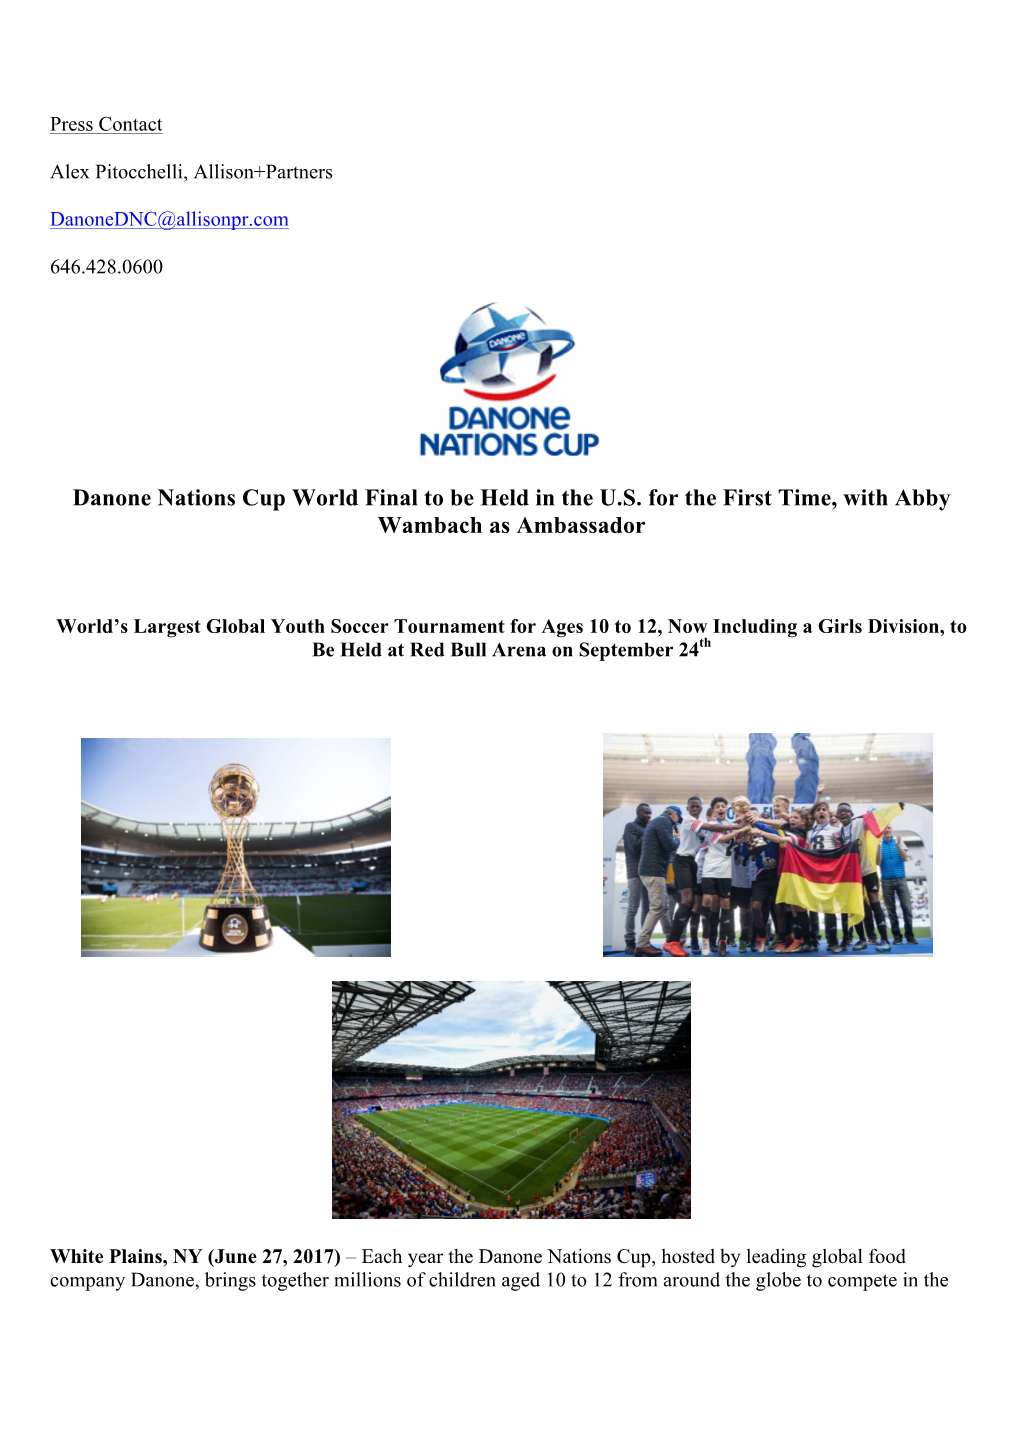 Danone Nations Cup World Final to Be Held in the U.S. for the First Time, with Abby Wambach As Ambassador